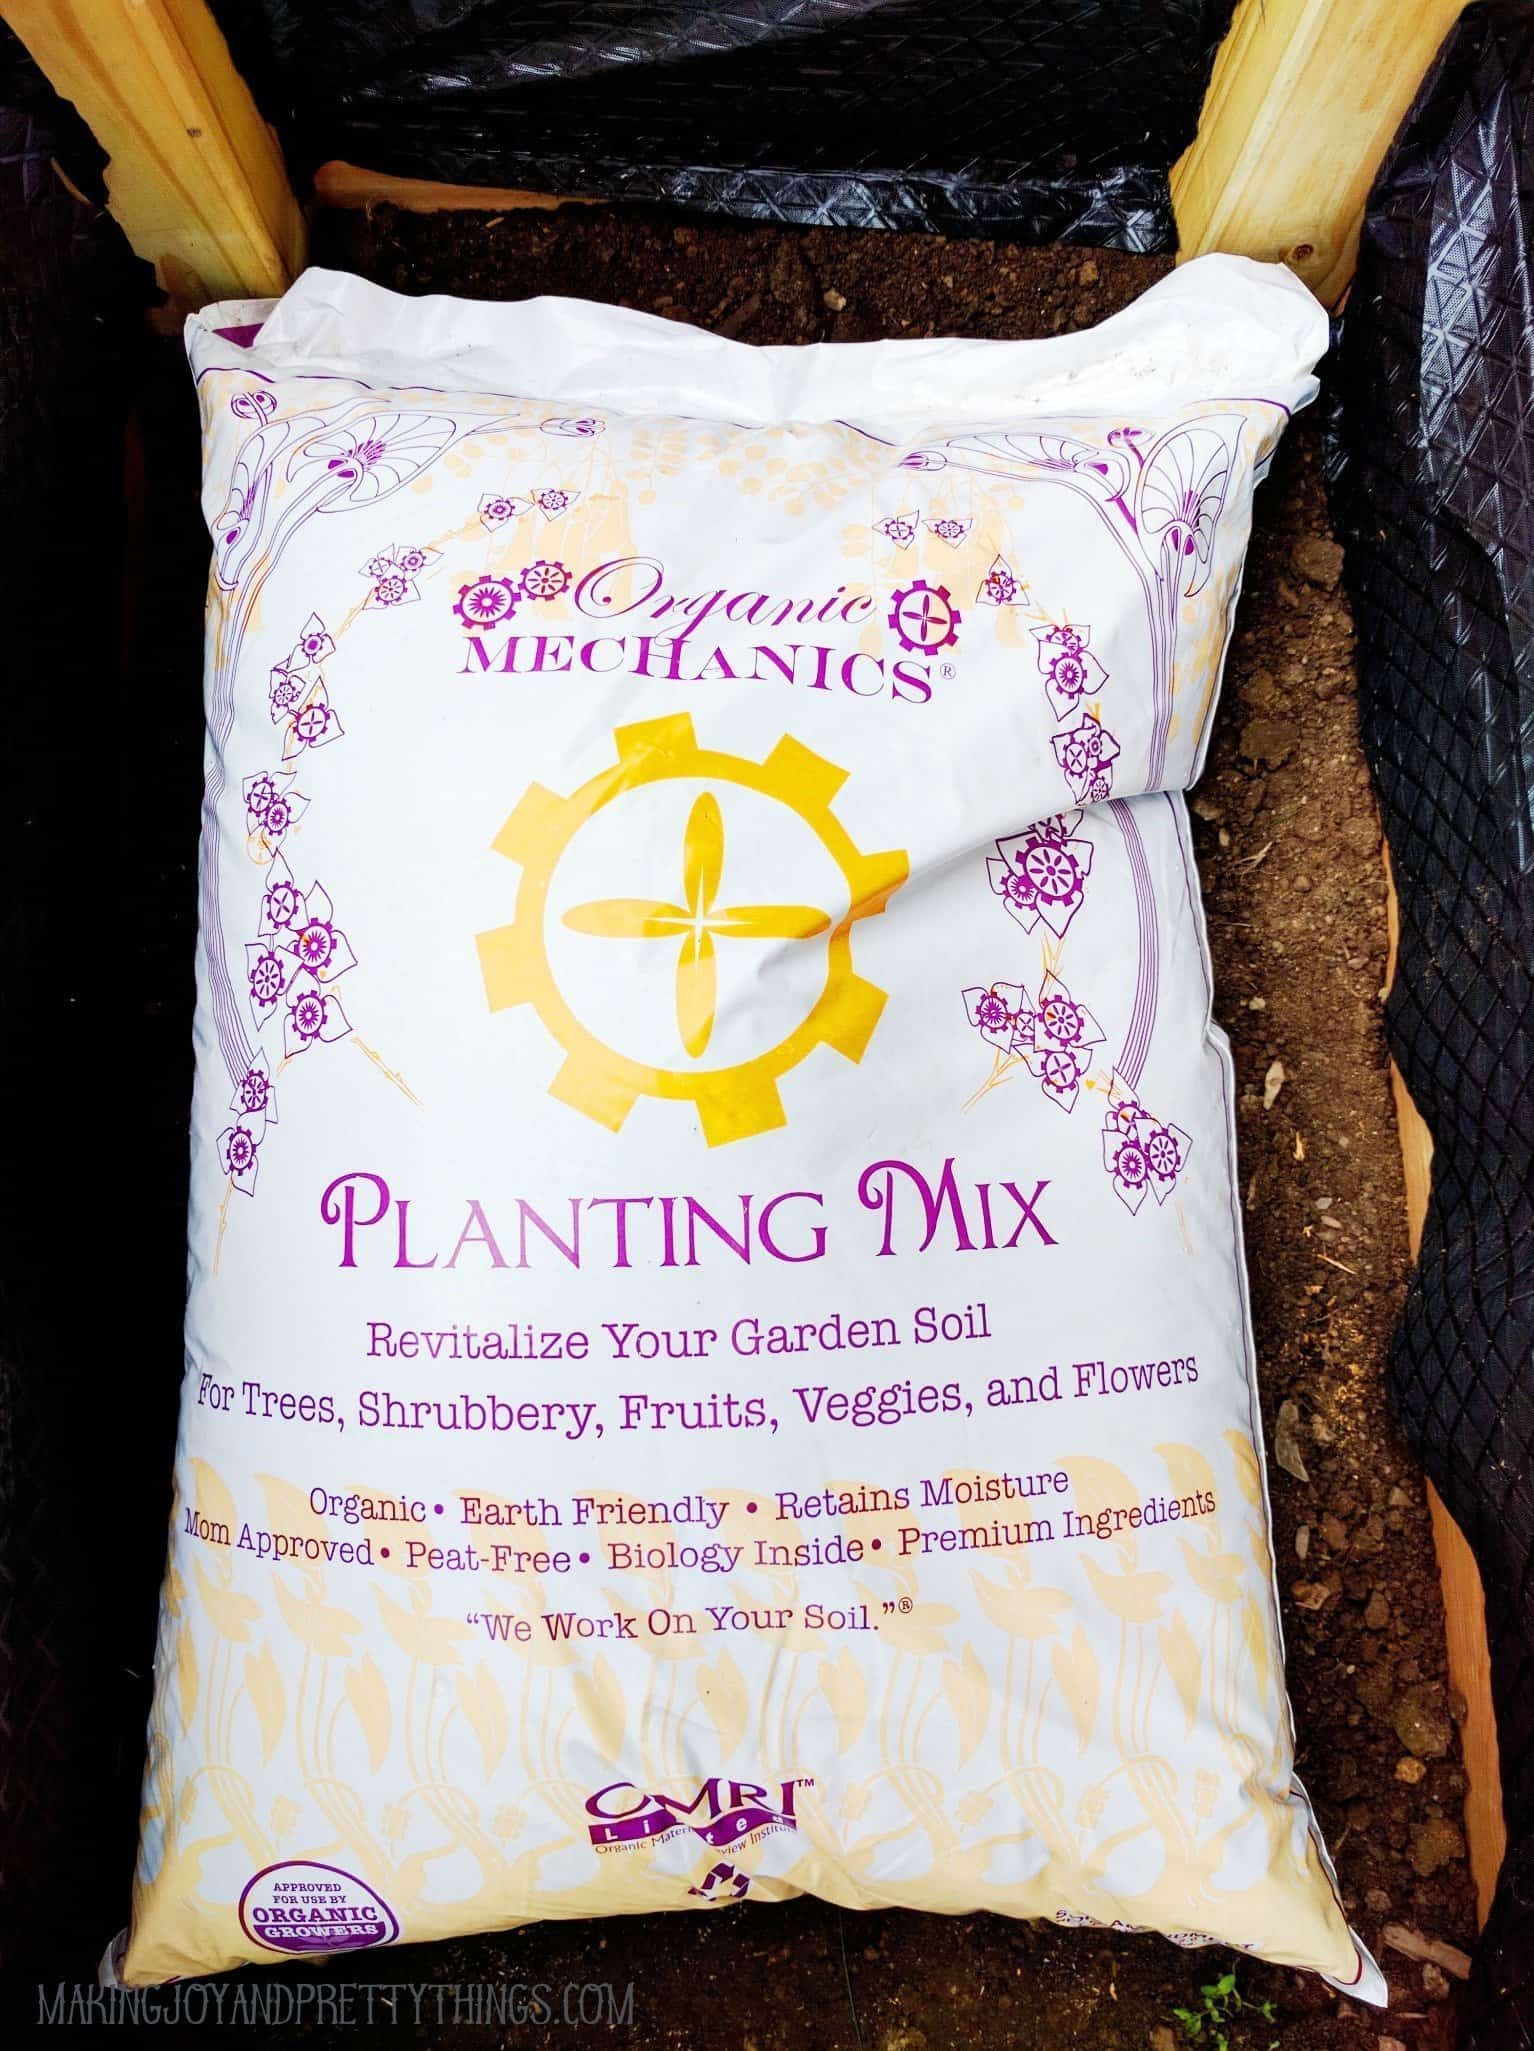 Do not use potting soil instead choose planting mix with drainage and made for the type of plants you will grow